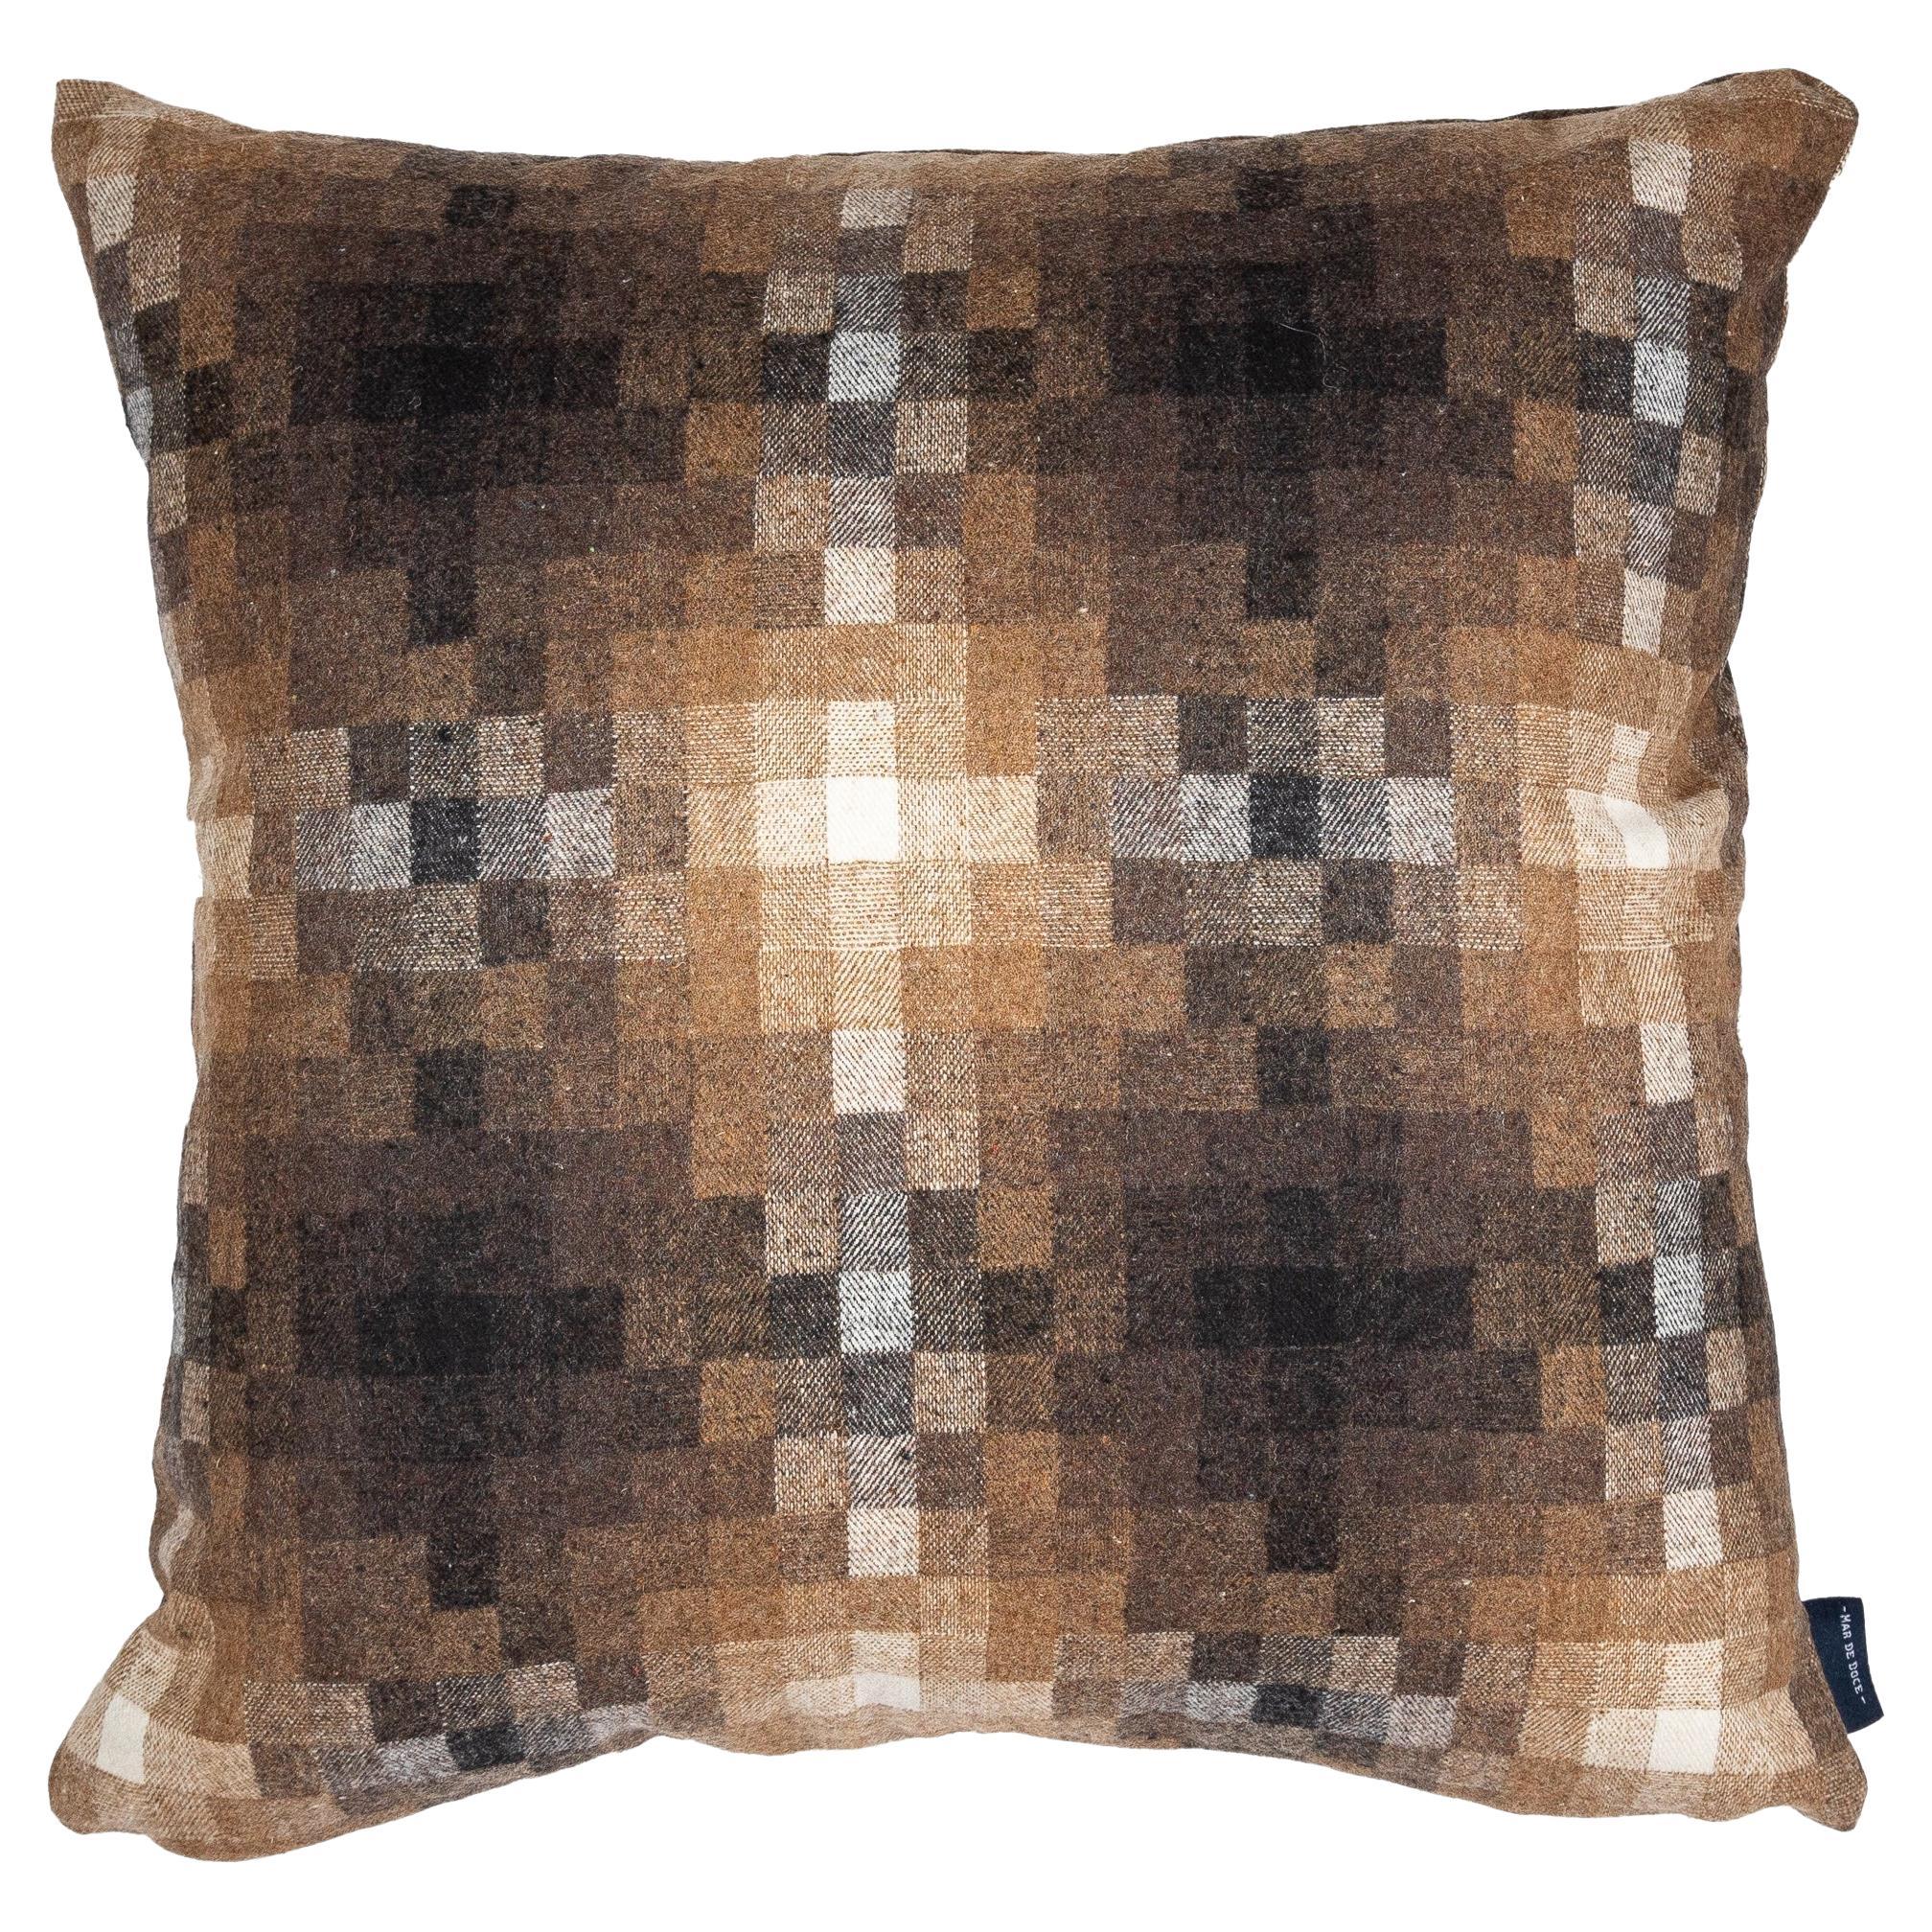 Wool blend luxury throw pillow in shades of brown- Arctic Mirage- by Mar de Doce